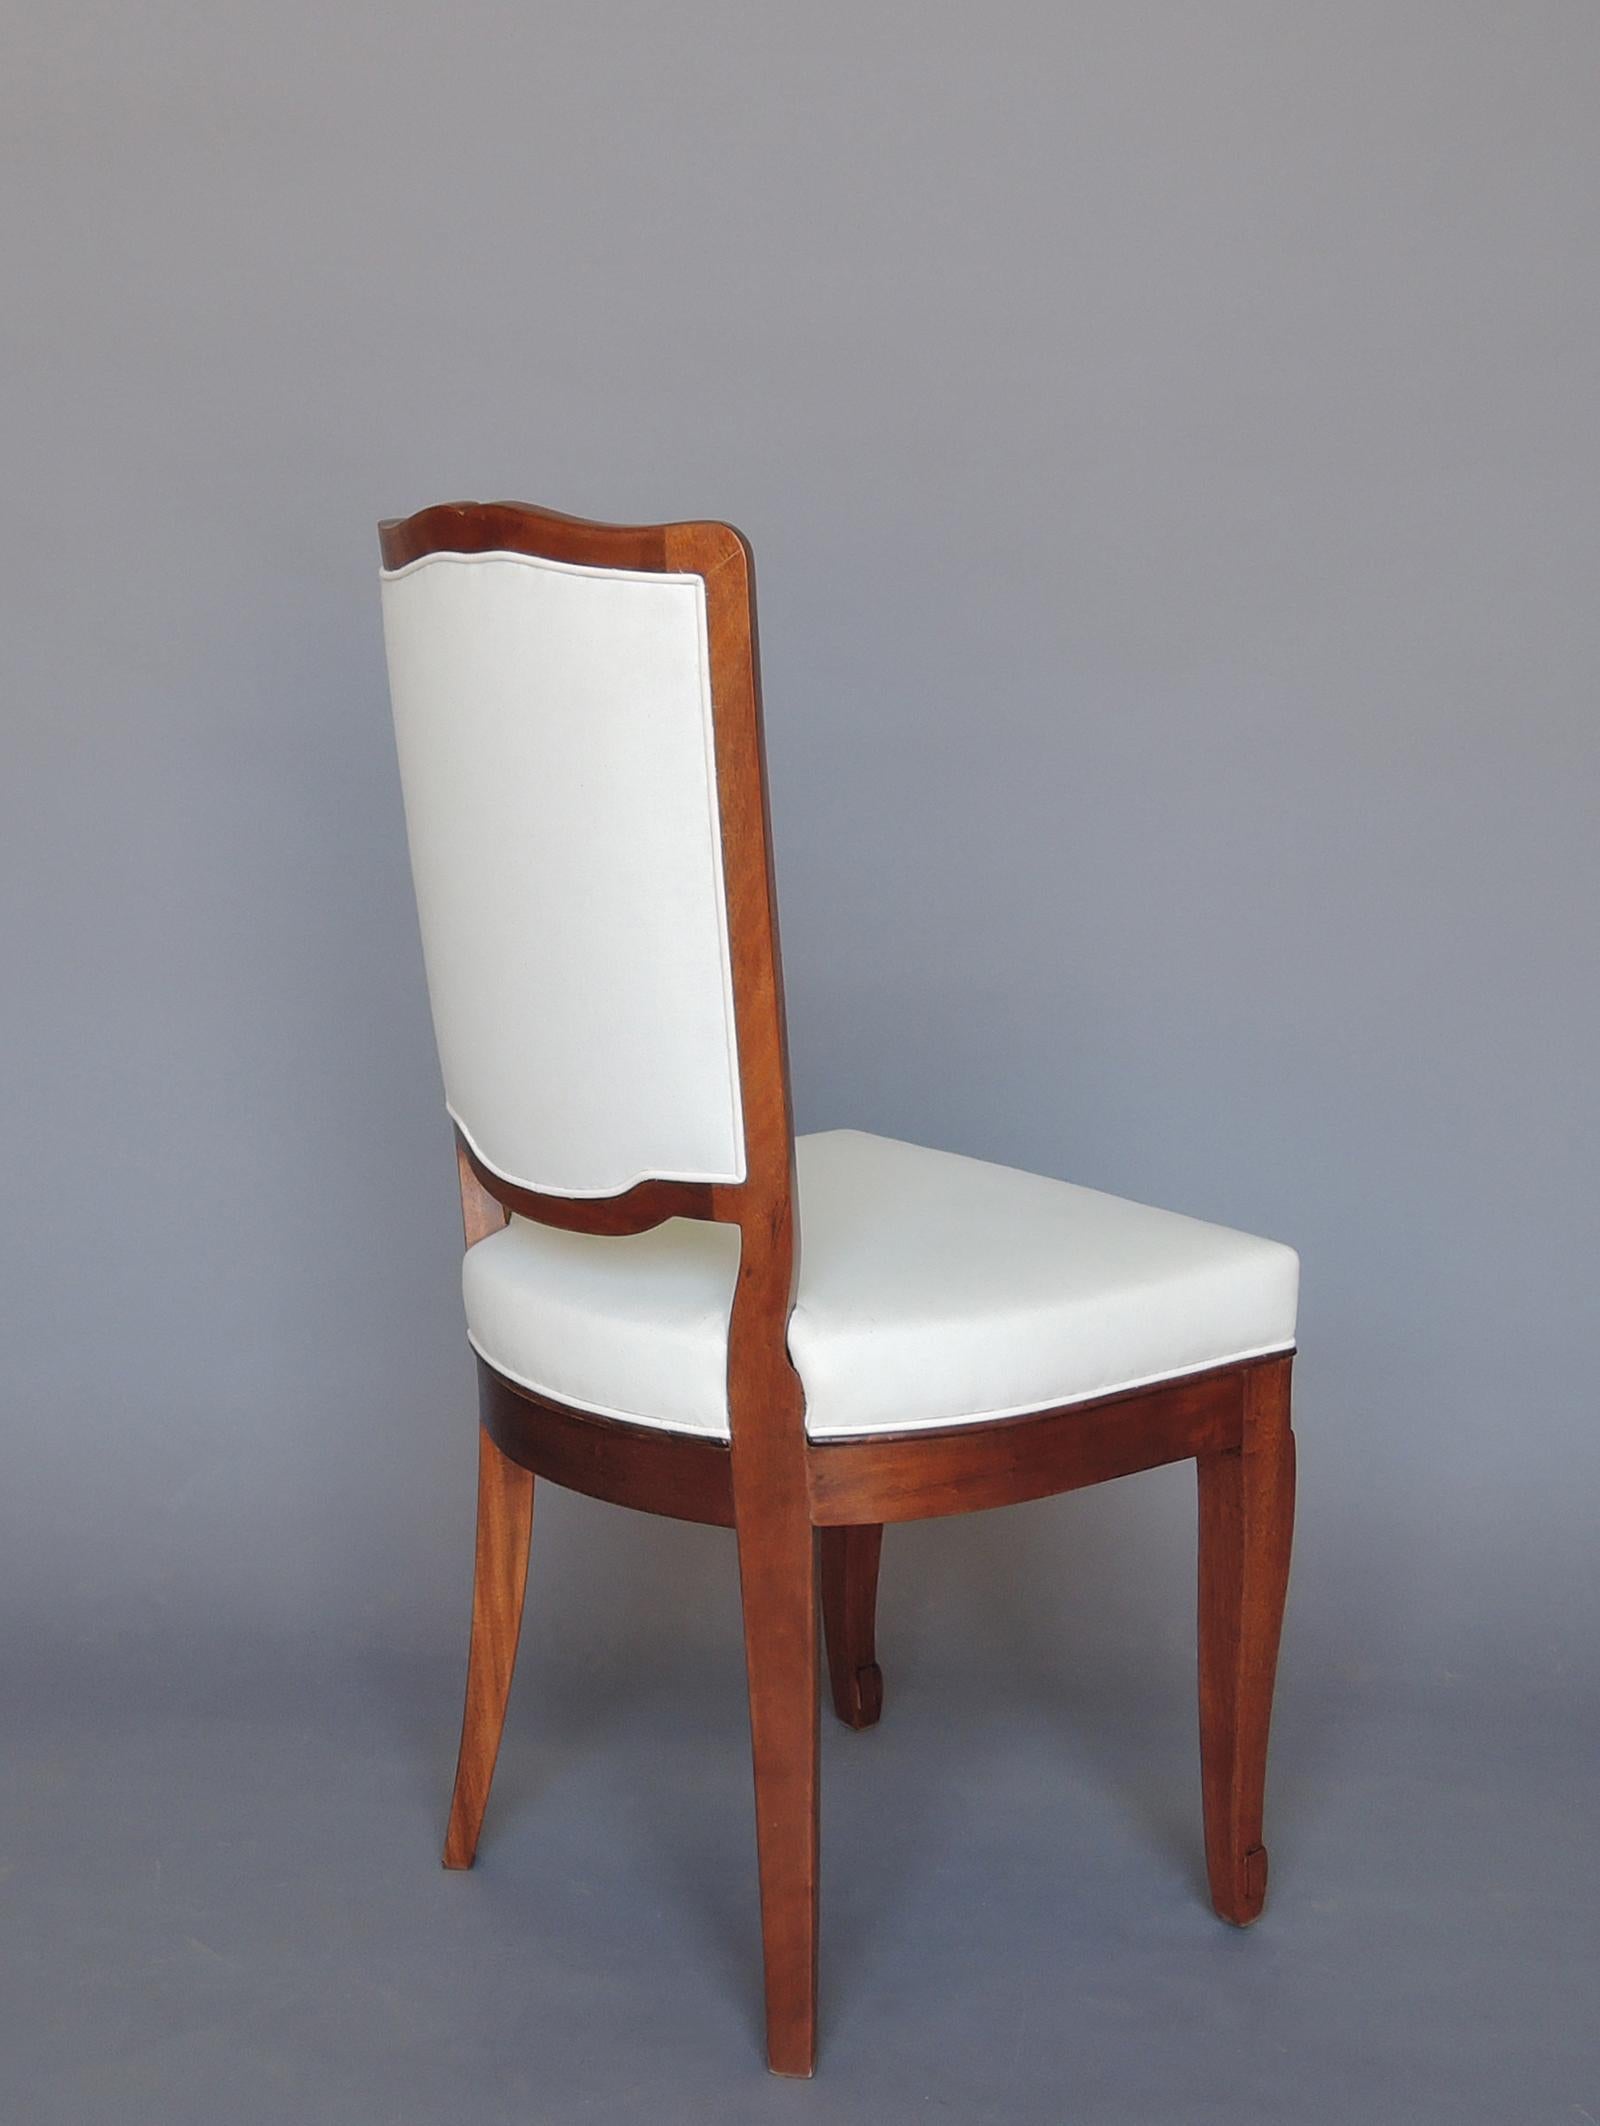 A Set of 12 Fine French Art Deco Mahogany Dining Chairs in the Manner of Arbus 1